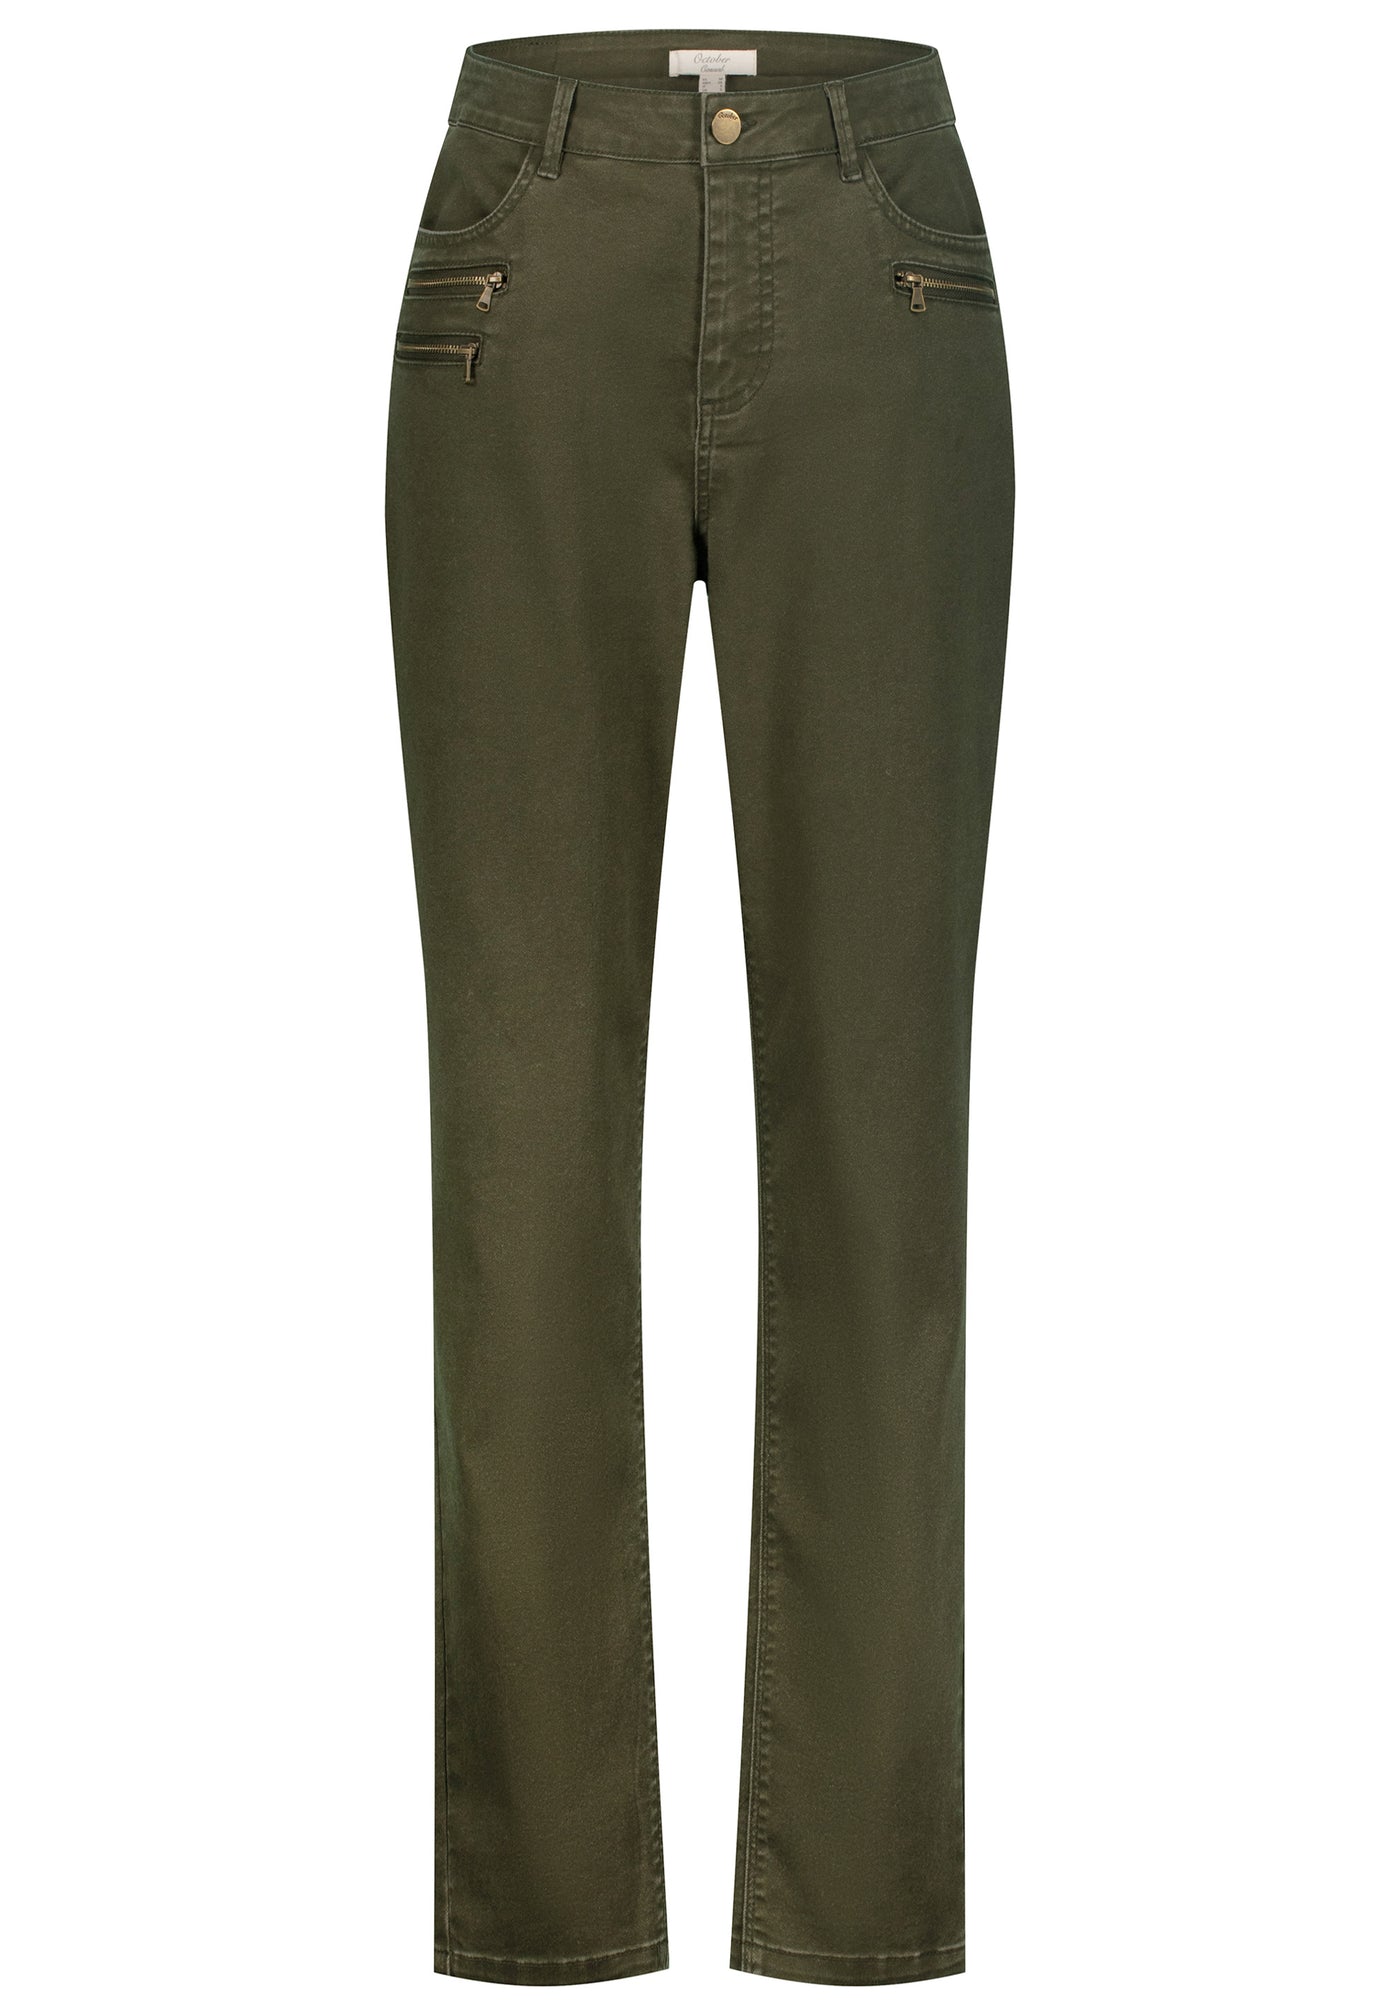 PANTS WITH 5 POCKETS WITH DECORATIVE ZIPPERS KHAKI